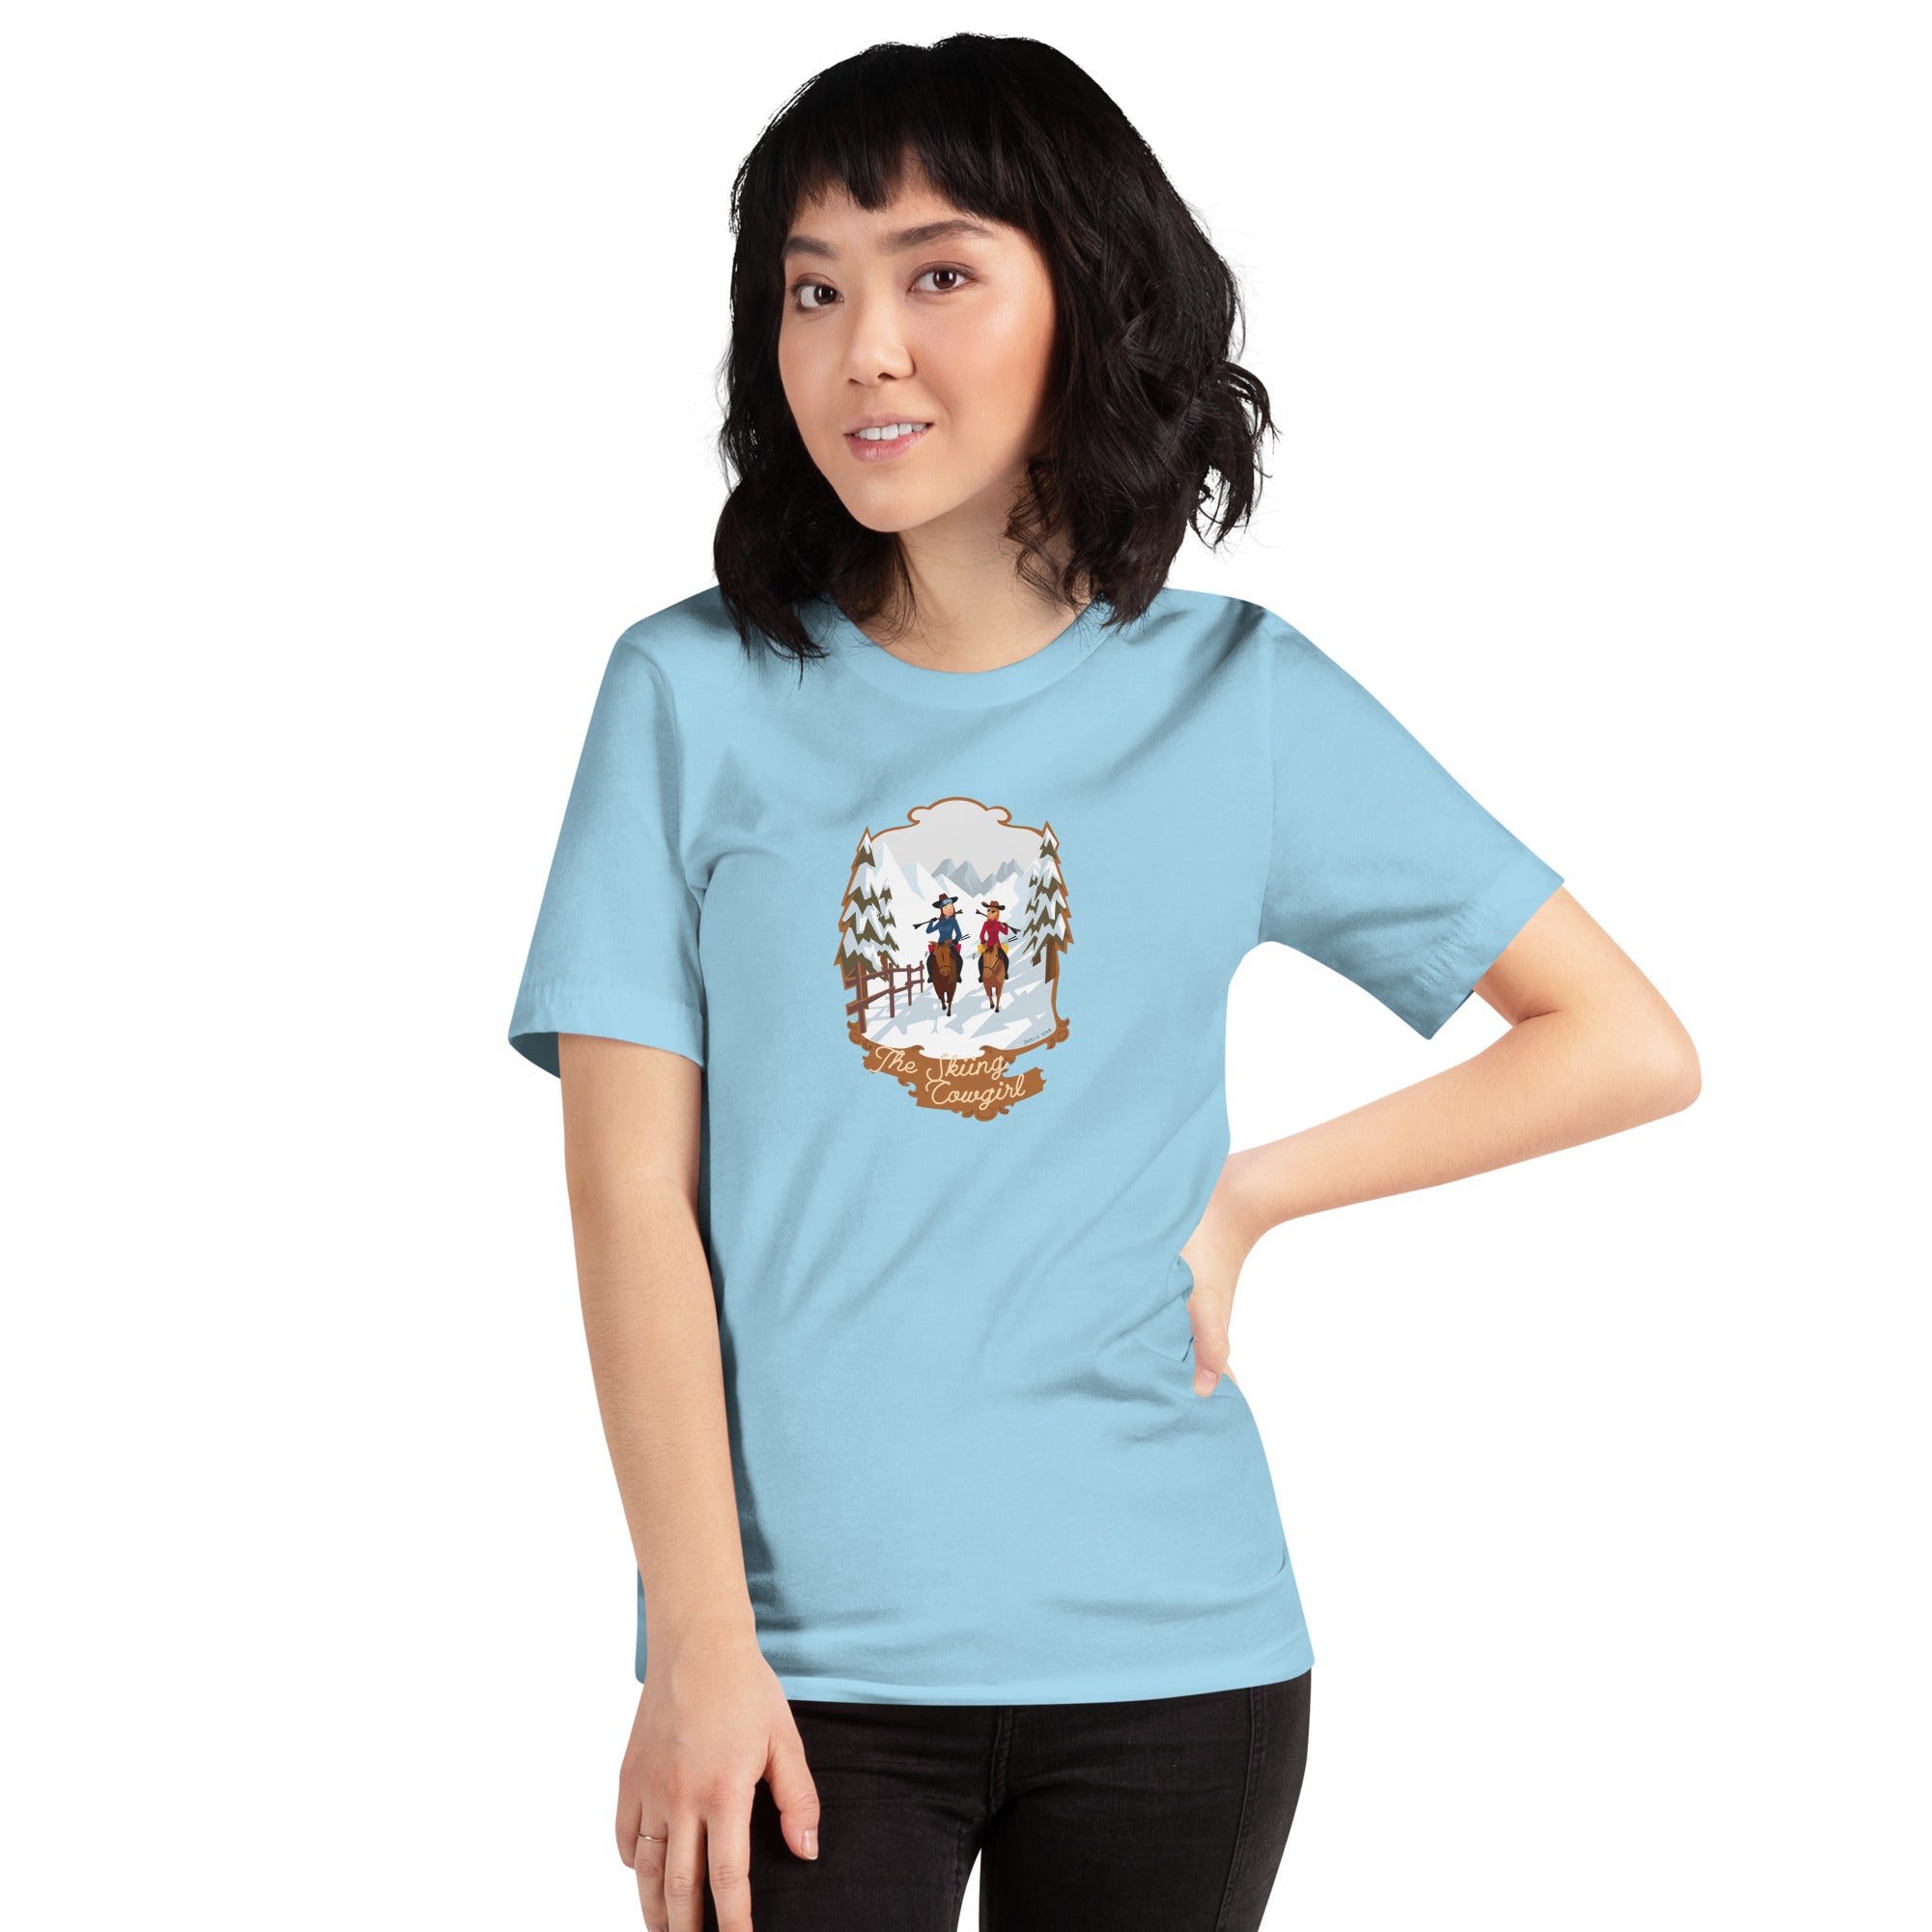 Unisex cotton t-shirt The Skiing Cowgirl on light colors